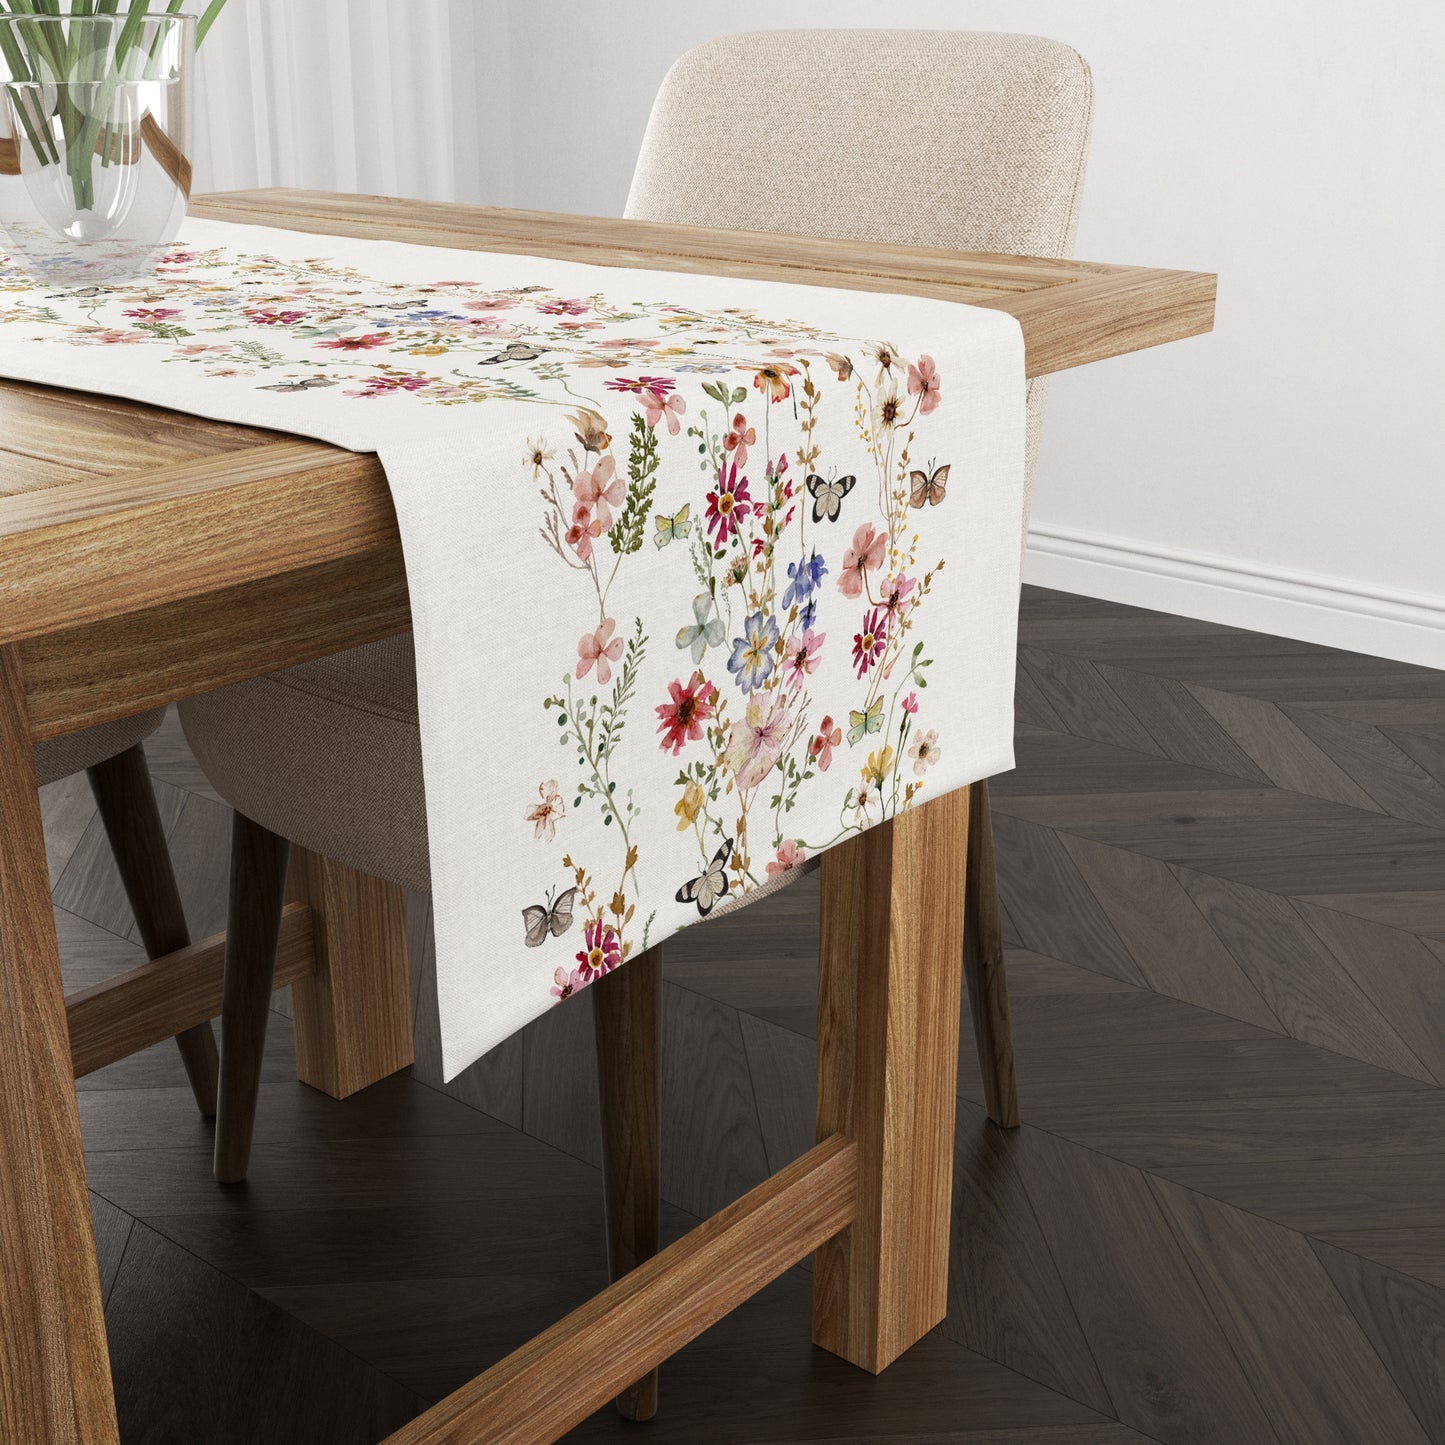 wood table with Watercolor Pressed & Dried Wildflowers TABLE RUNNER from Blue Water Songs on it